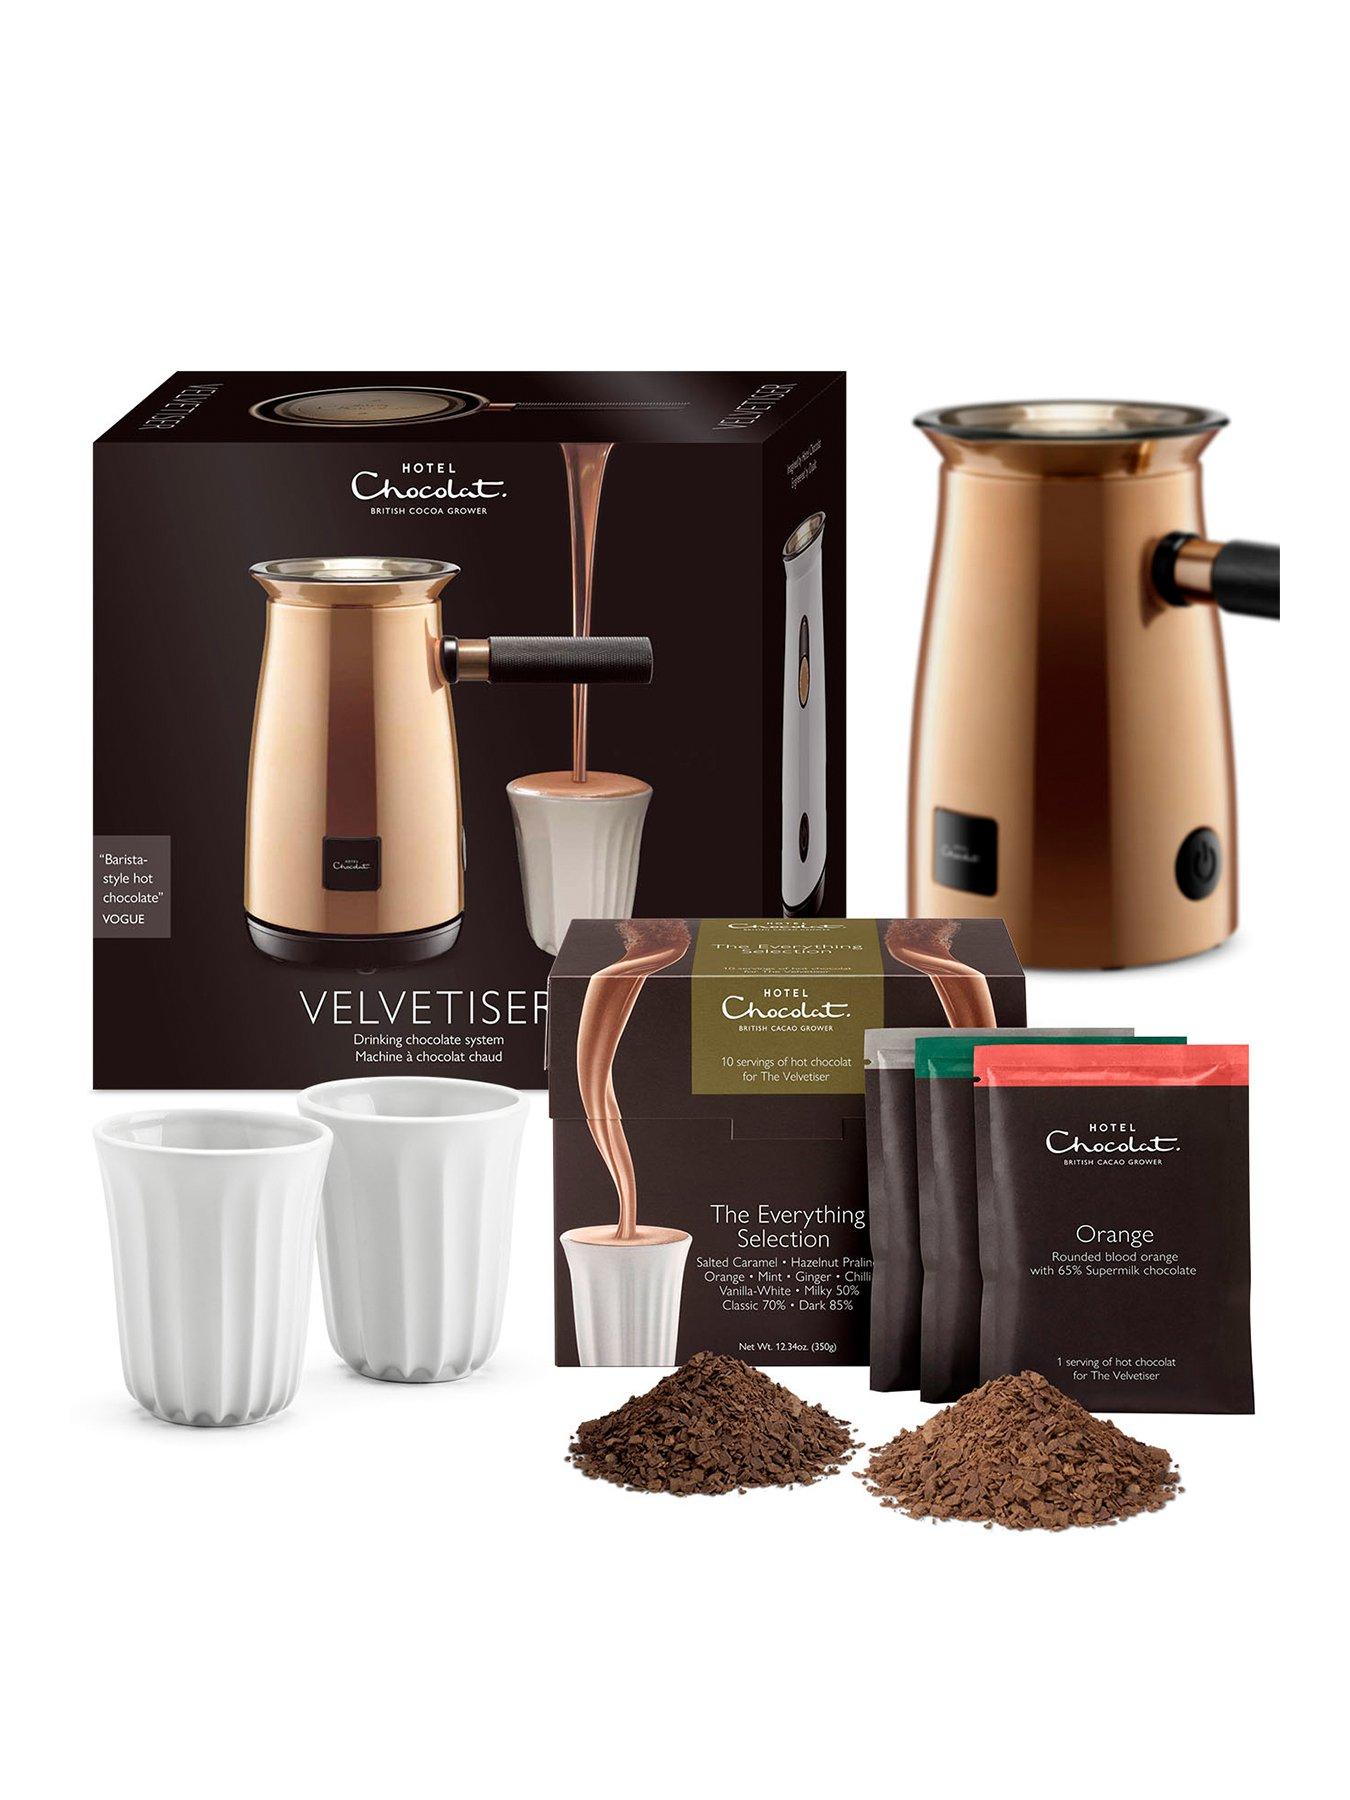 Our favourite Hotel Chocolat Velvetiser deal has made a comeback